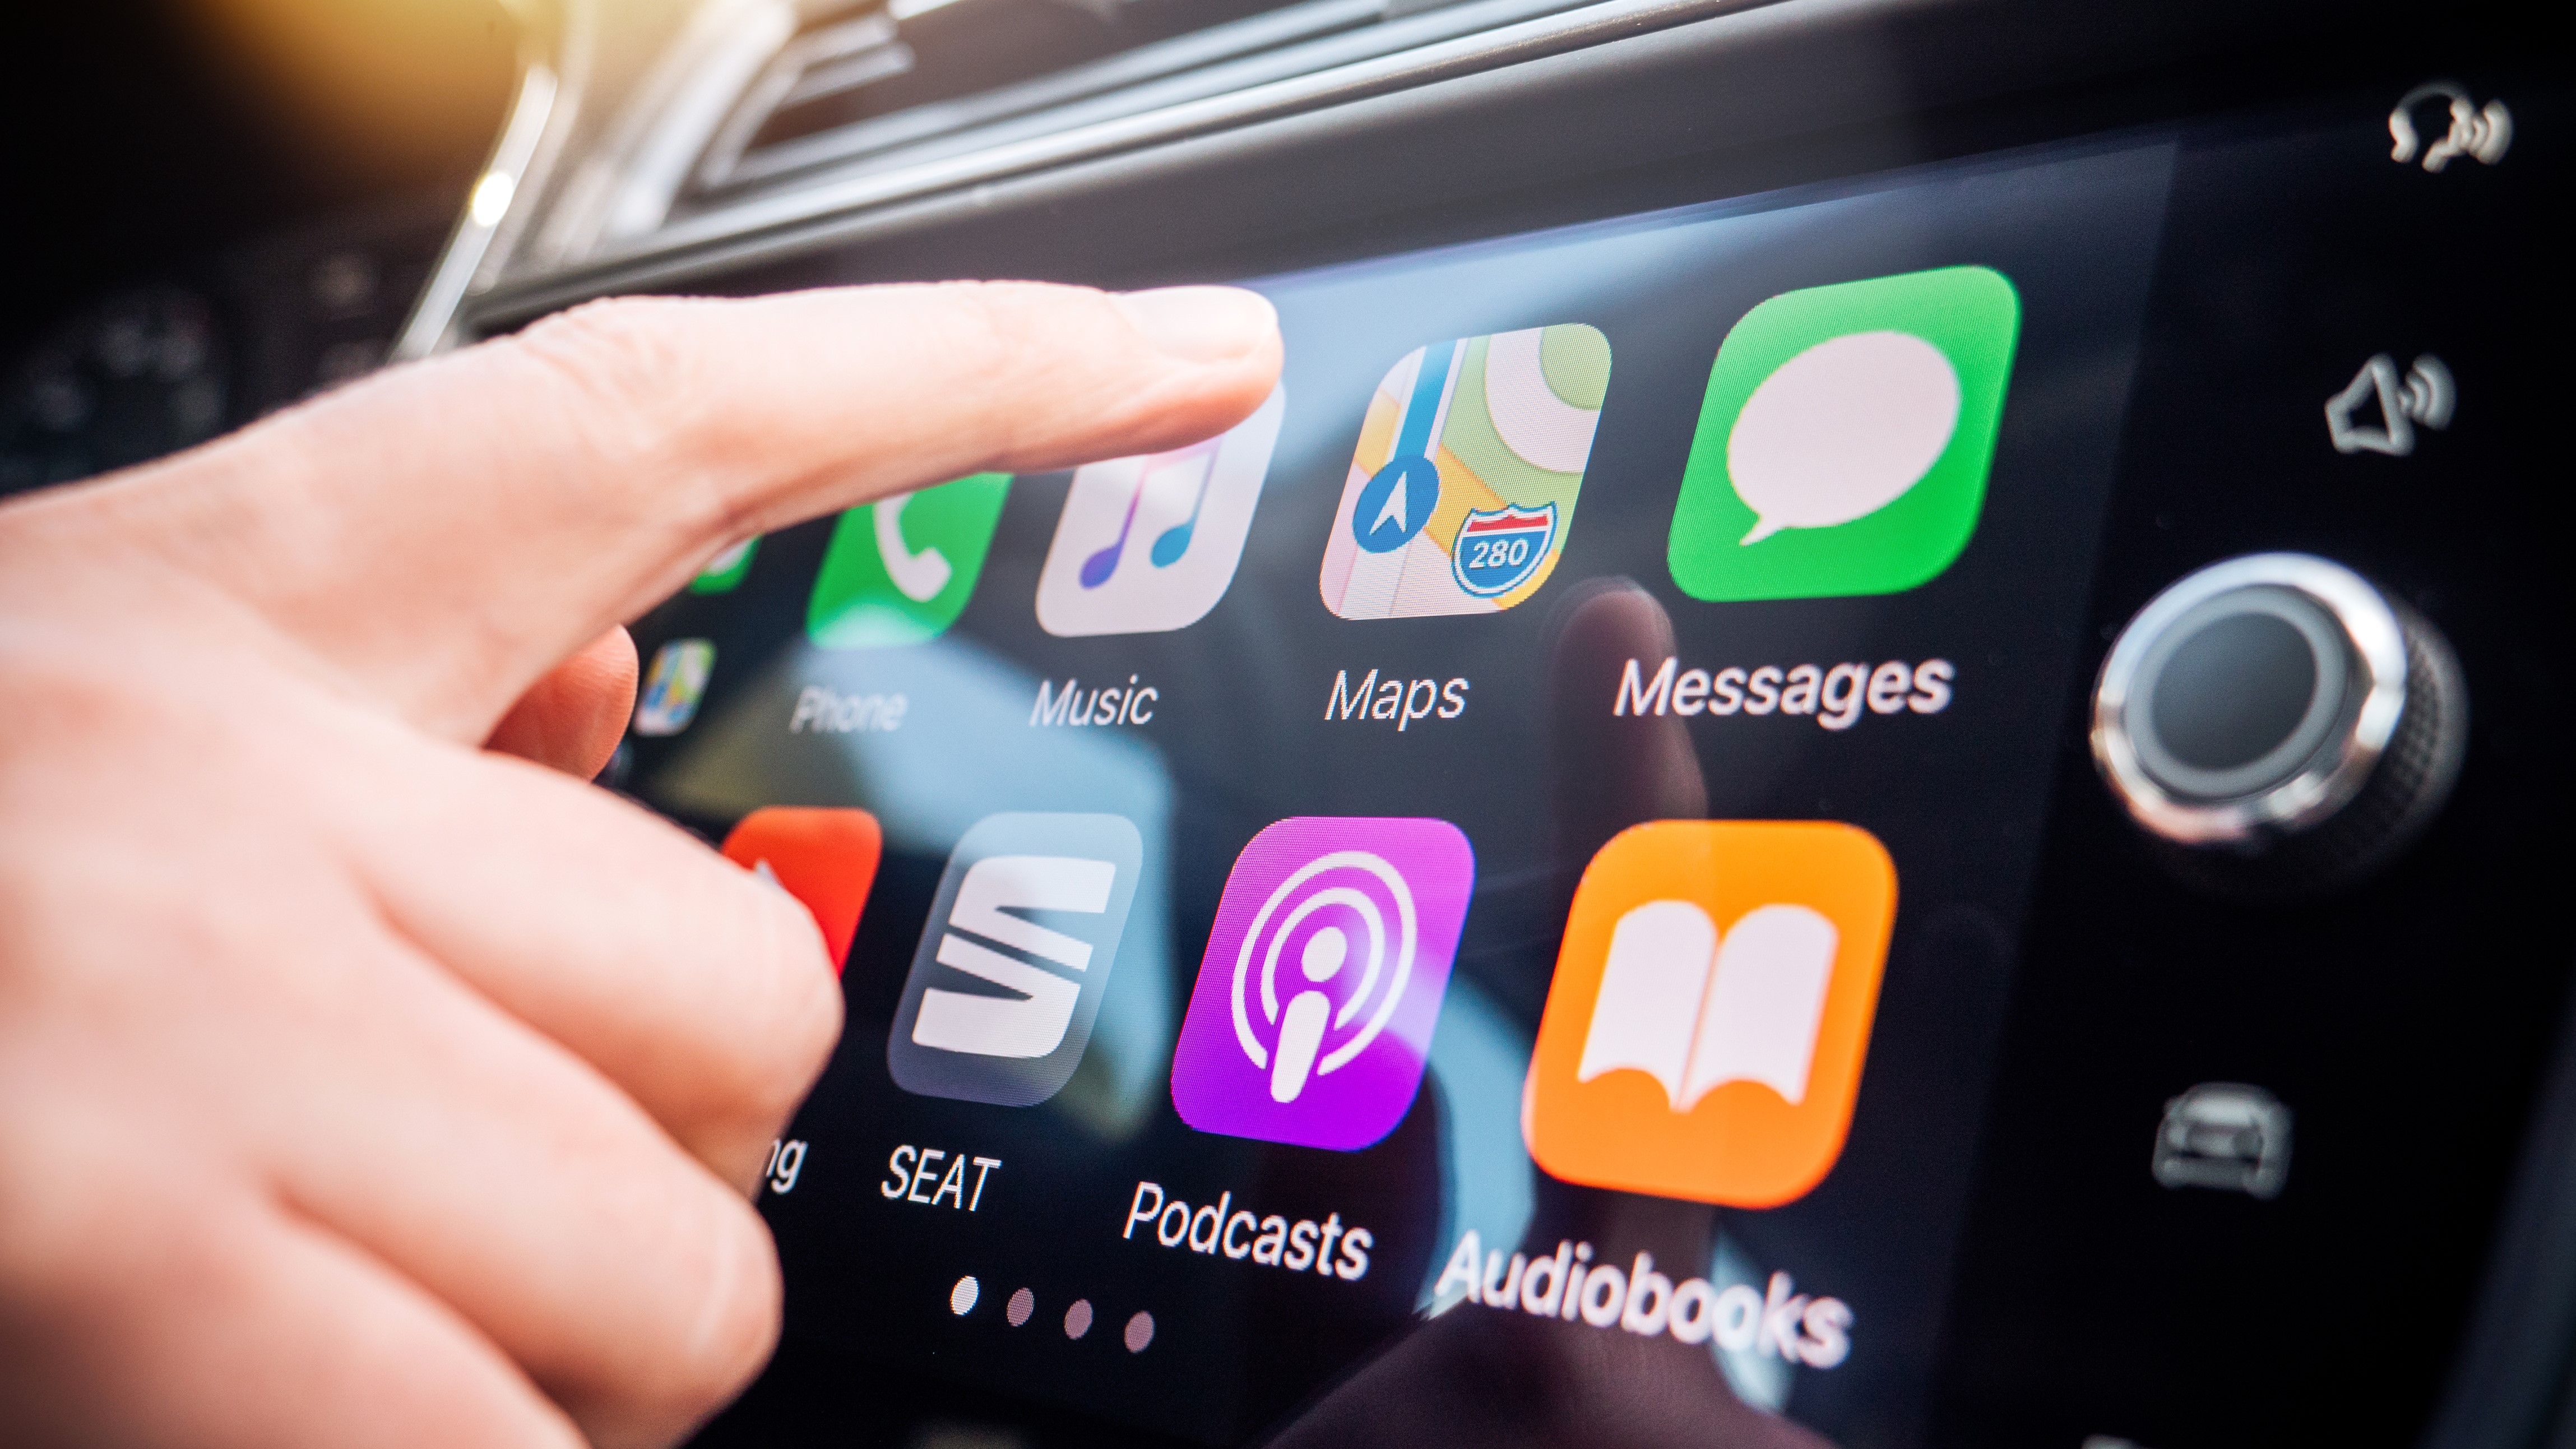 Everything you need to know about Apple CarPlay